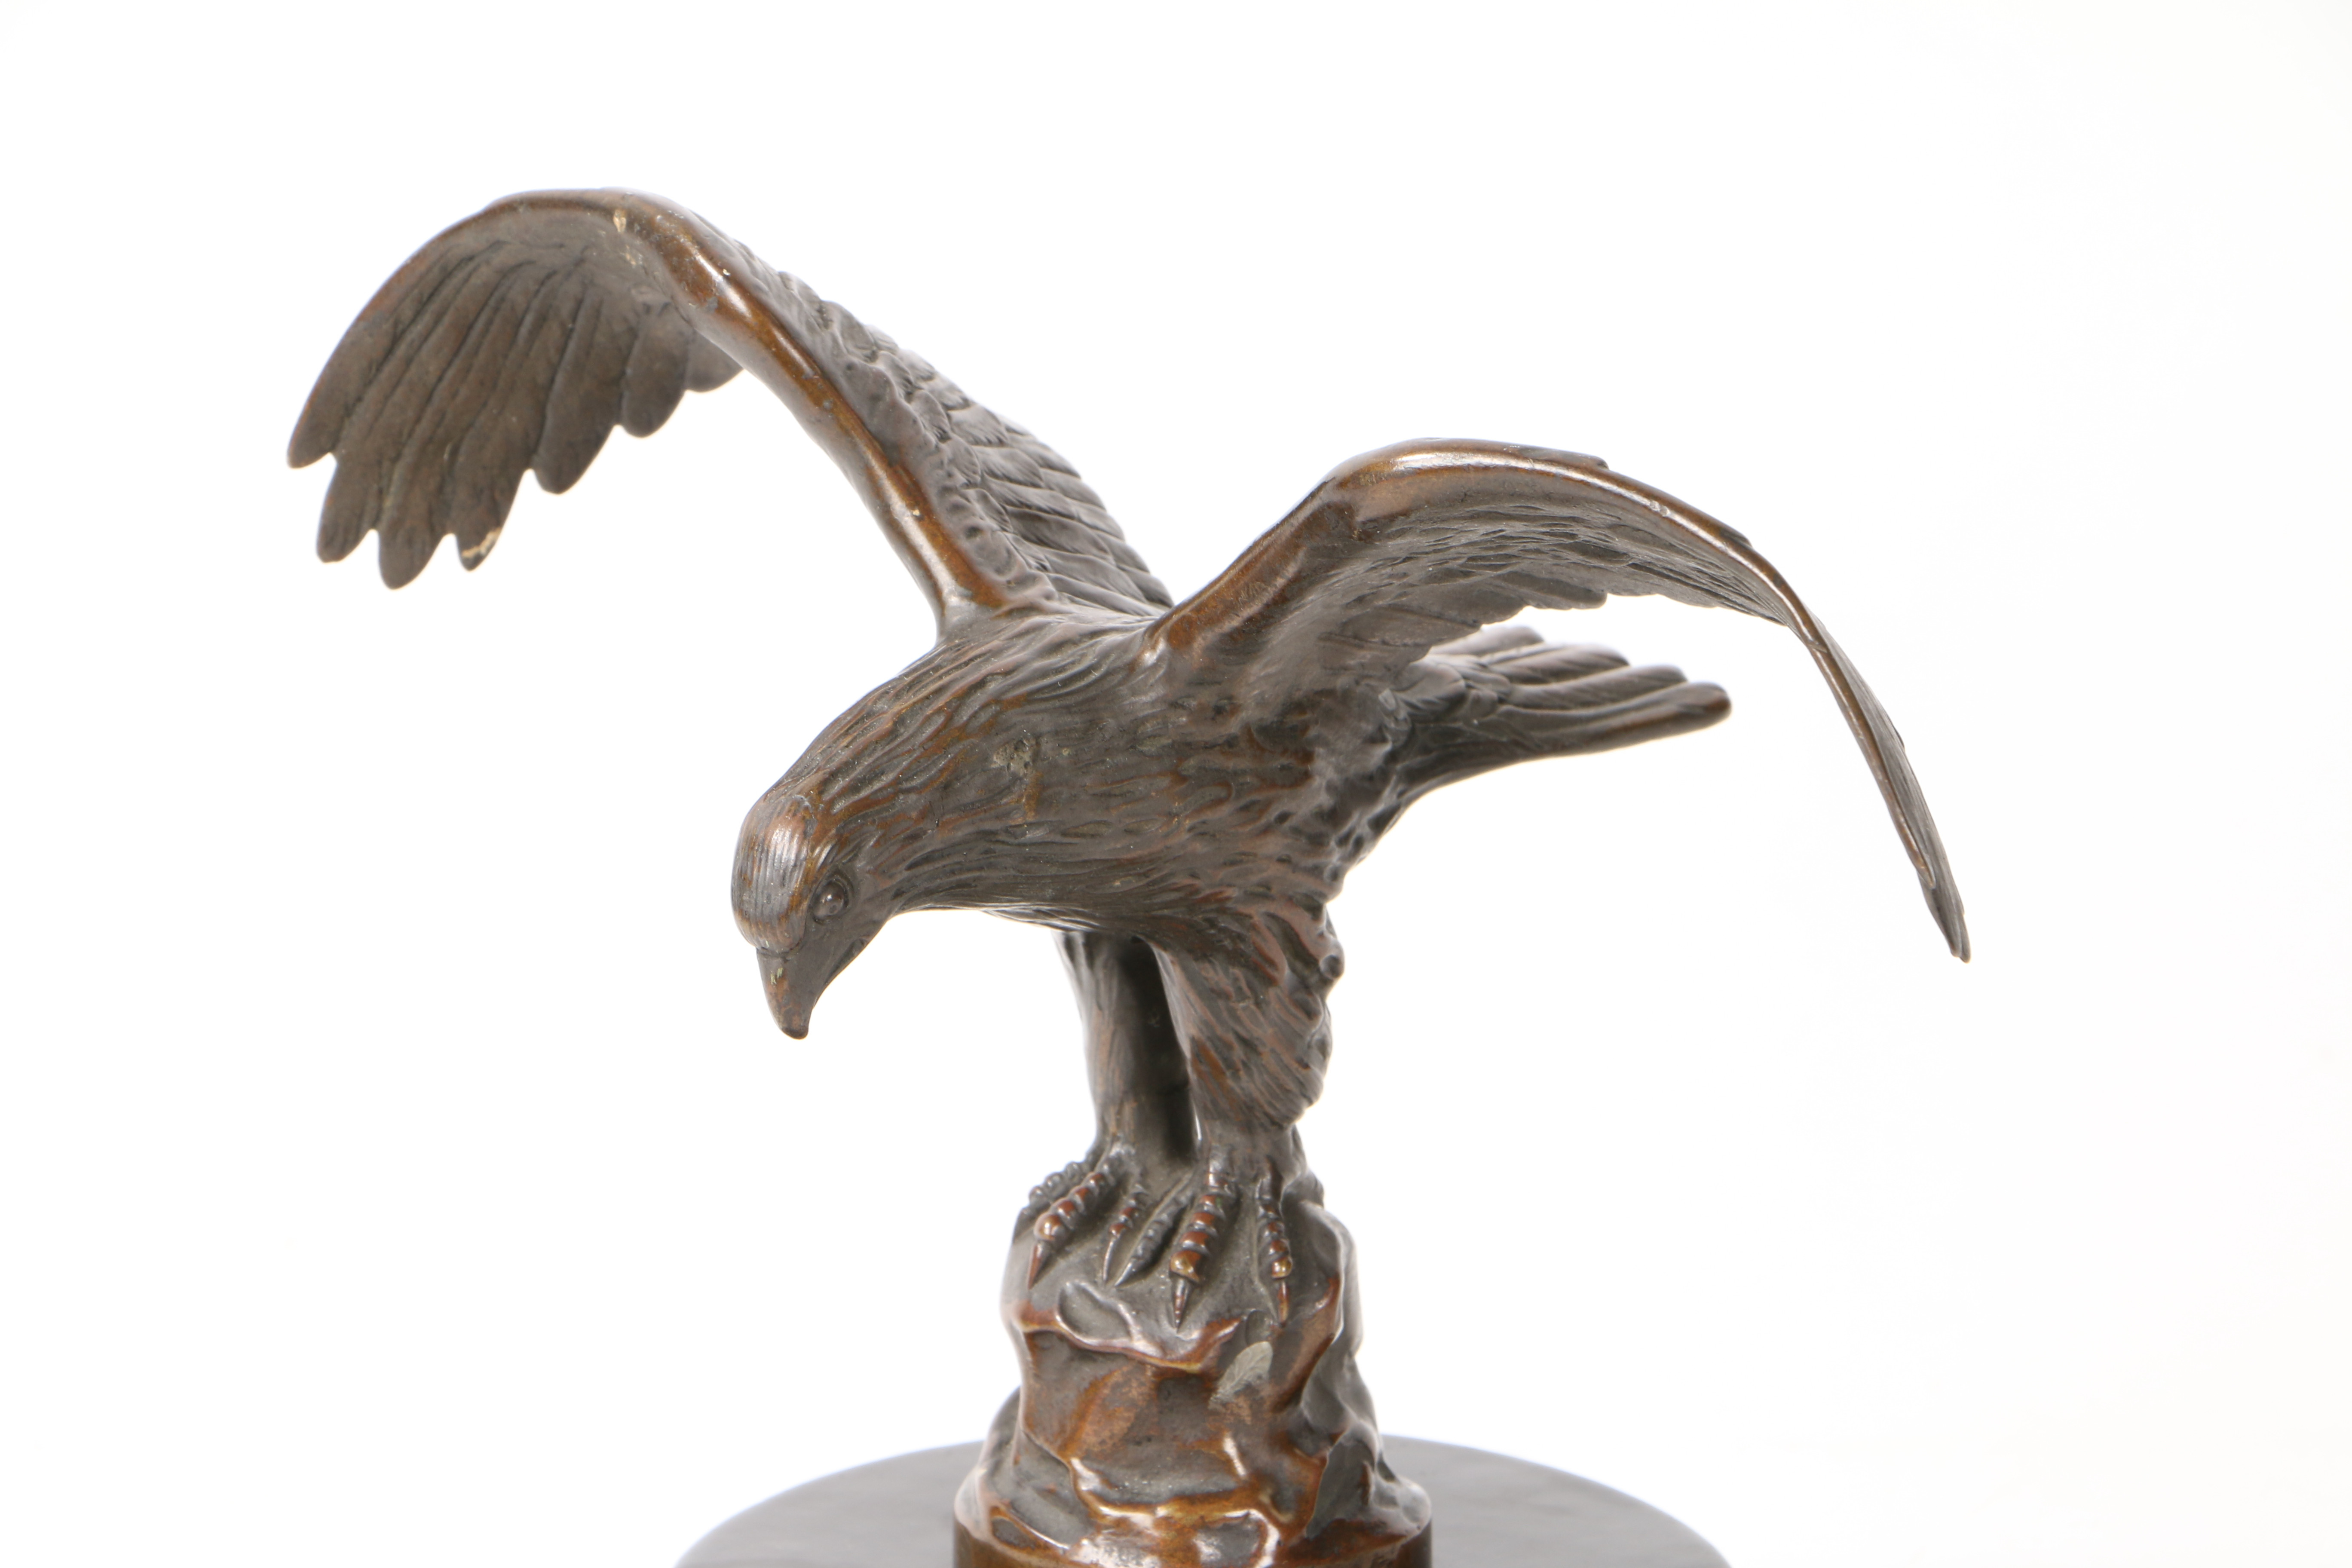 A LATE 19TH/ EARLY 20TH CENTURY BRONZE SCULPTURE OF A EAGLE. - Image 2 of 5